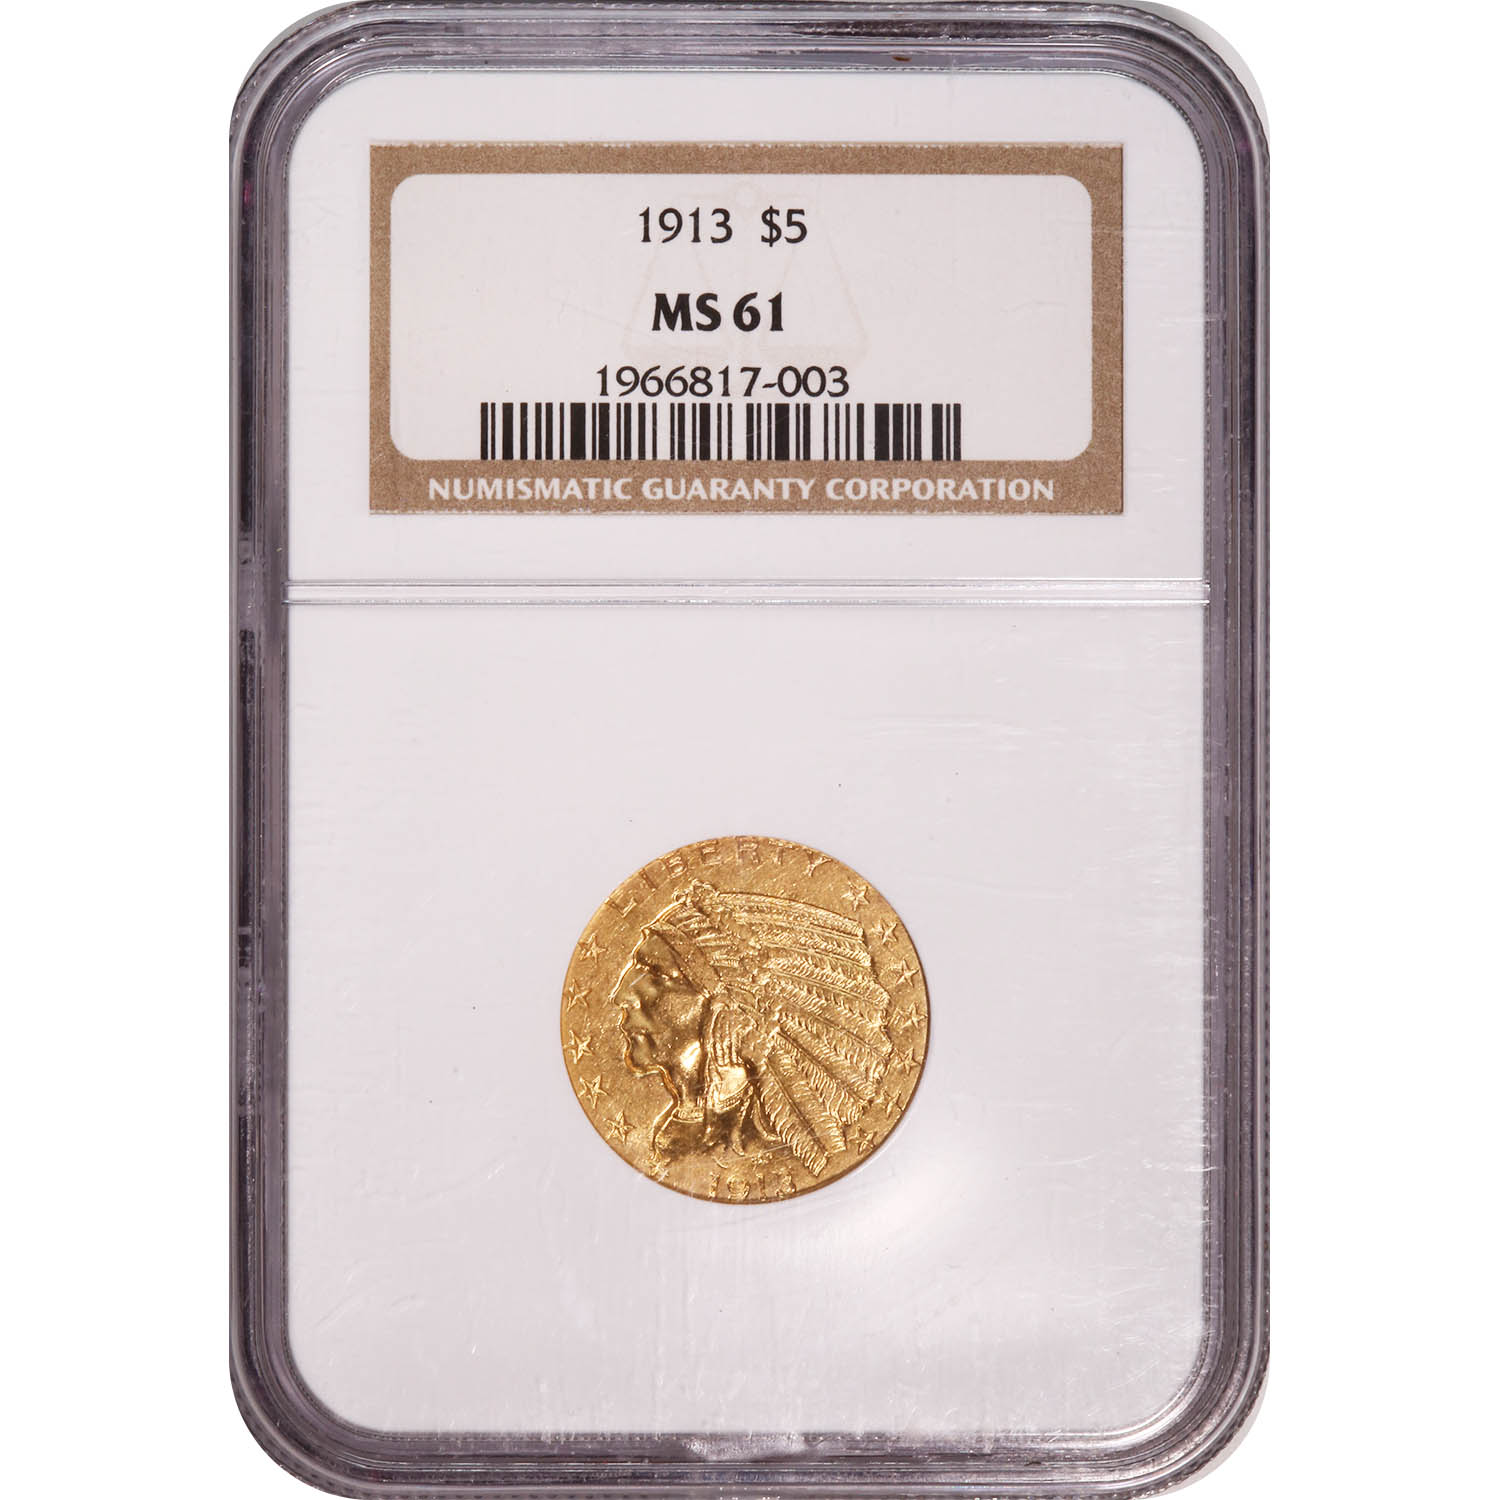 Certified $5 Gold Indian 1913 MS61 NGC